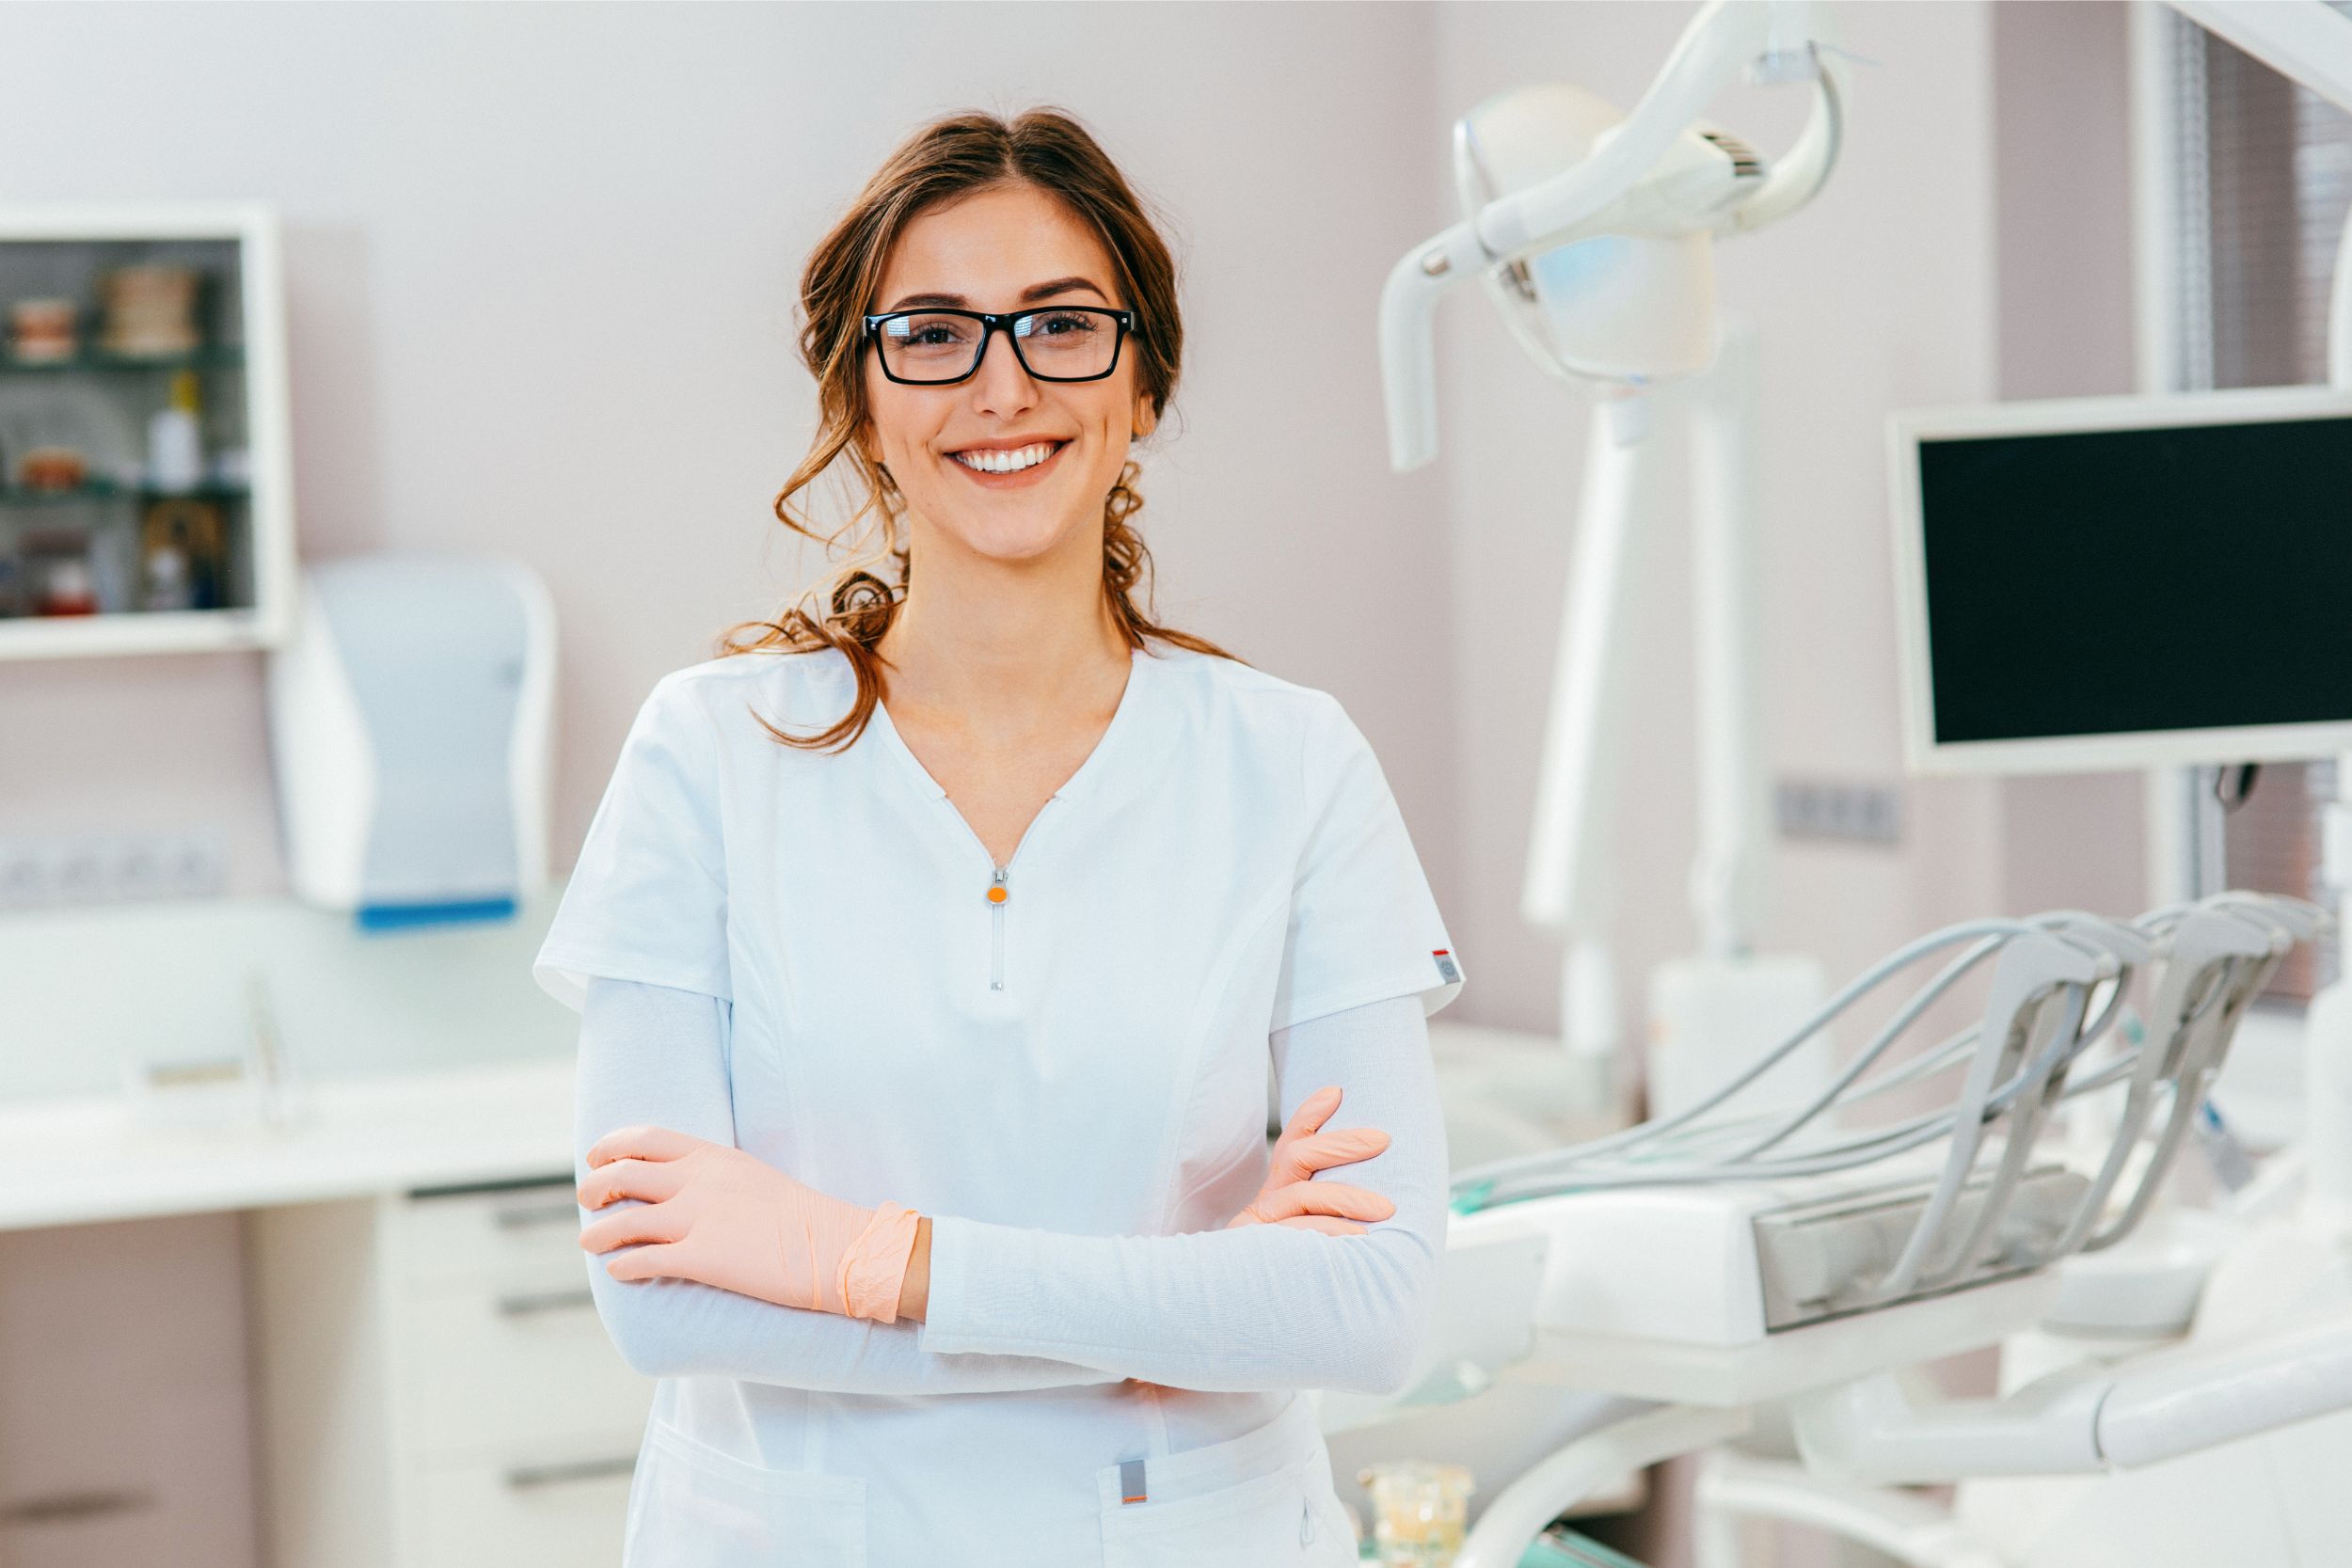 Selecting a new dentist